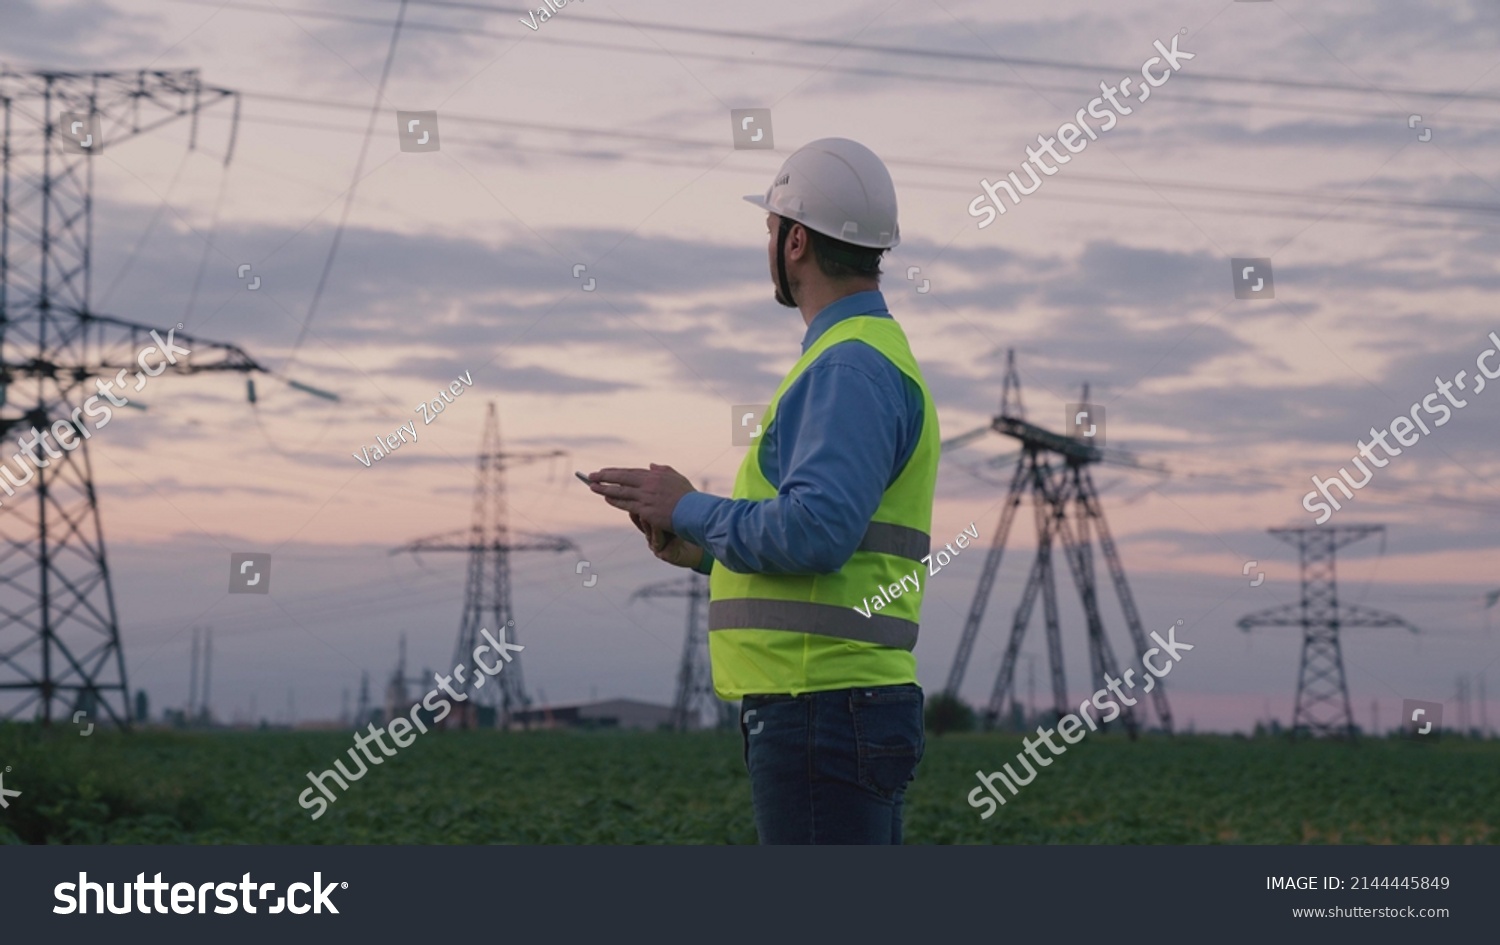 technology concept with high voltage power lines. electrical engineer helmet digital tablet sunset. power engineer power plant high voltage voltage energy. concept electrical engineer working sunset. #2144445849